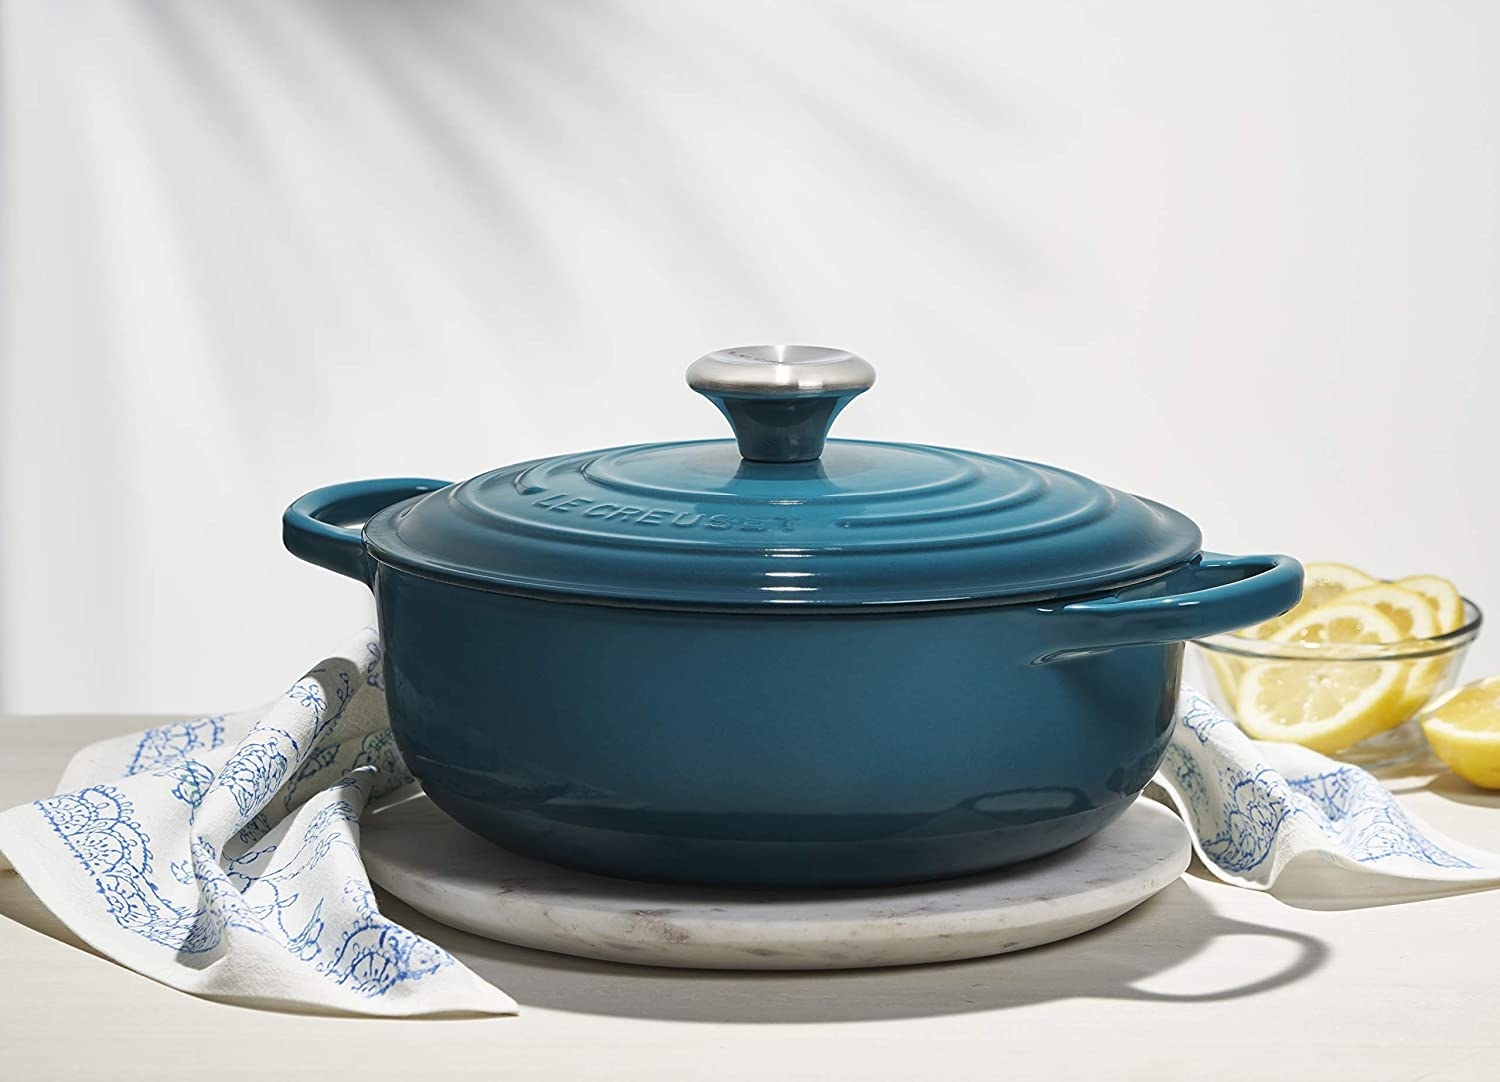 The blue Dutch oven